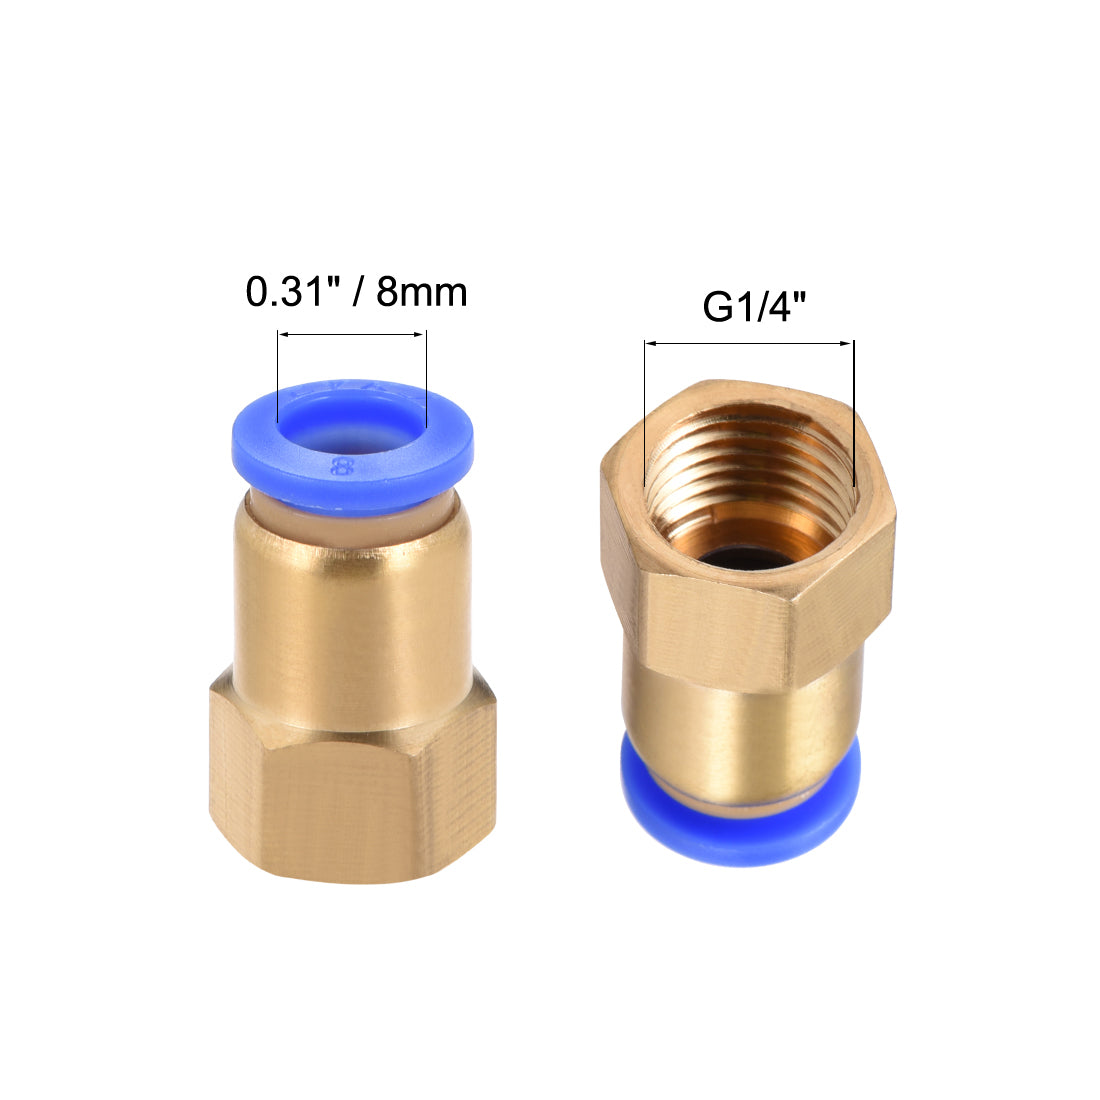 uxcell Uxcell Push to Connect Tube Fitting Adapter 8mm OD x G1/4" Female 4pcs